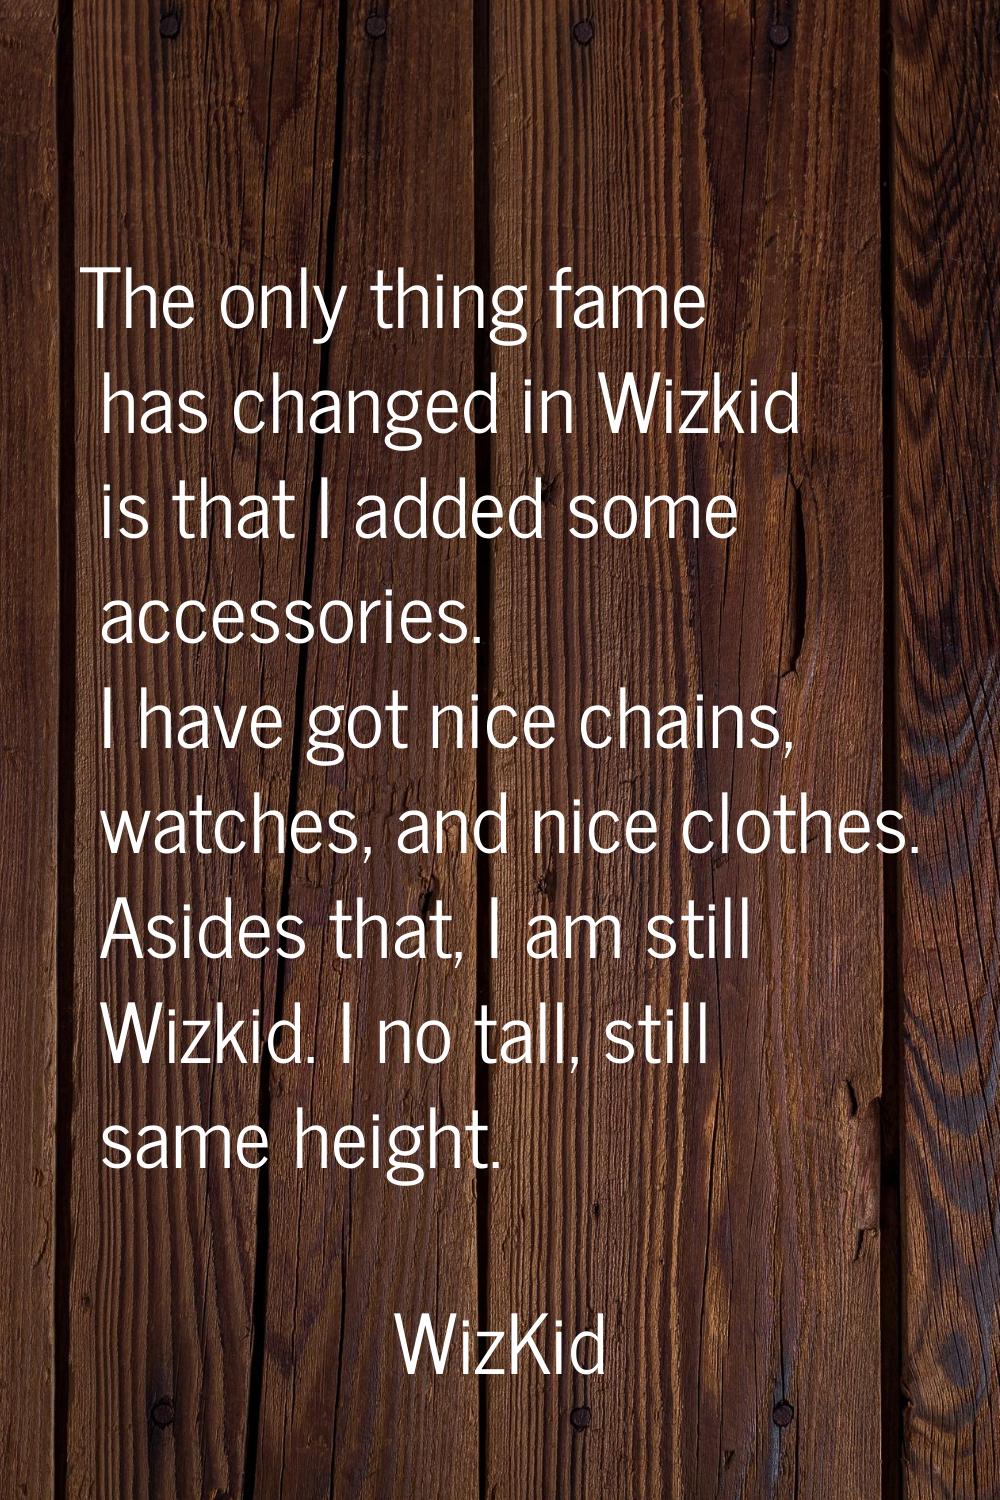 The only thing fame has changed in Wizkid is that I added some accessories. I have got nice chains,